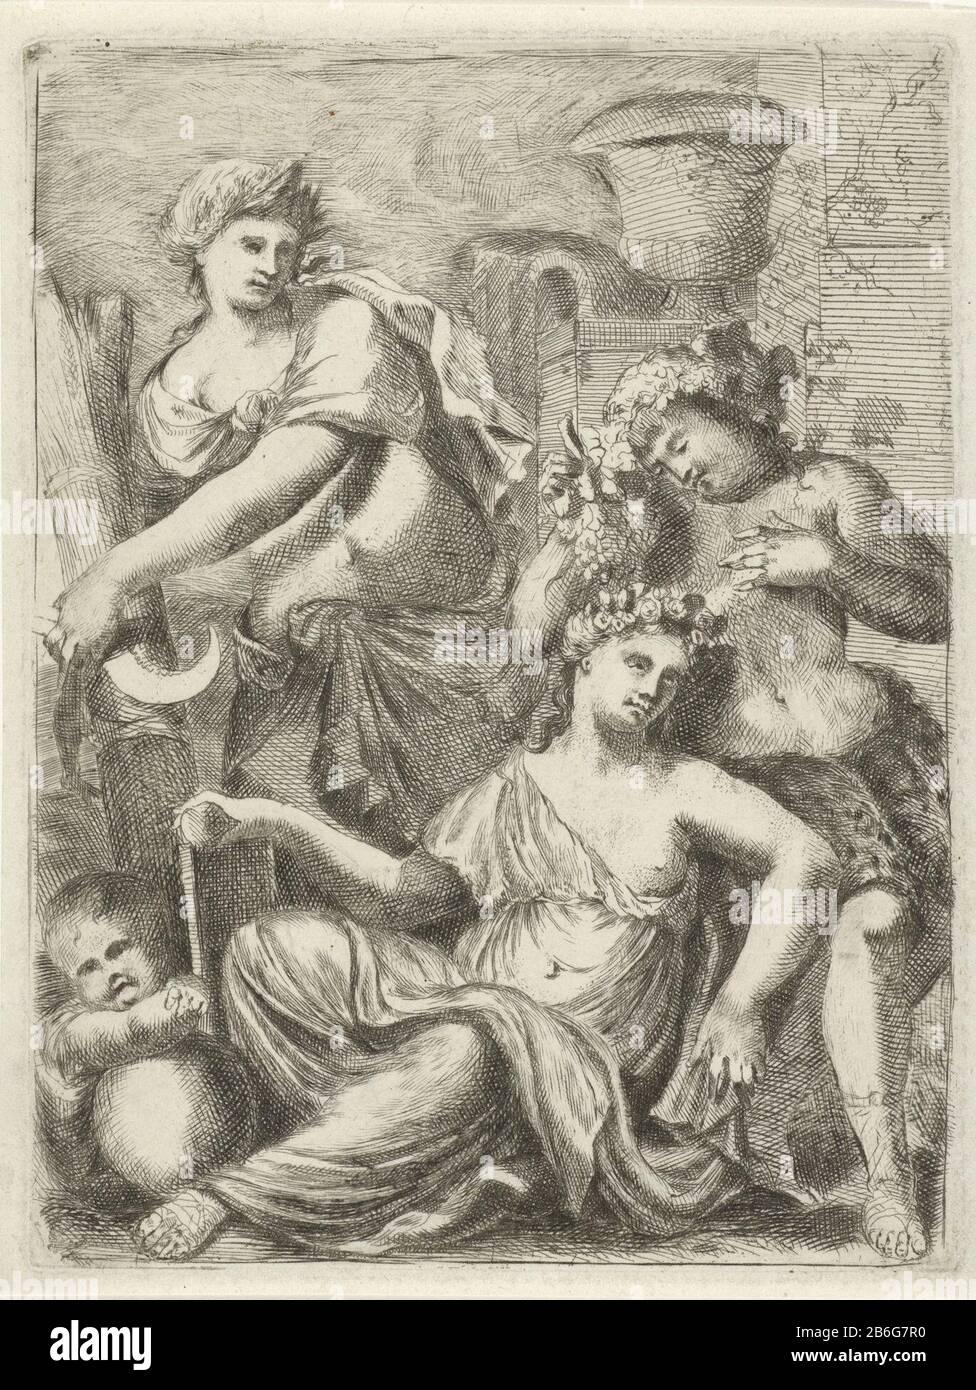 Ceres, Bacchus en Venus Ceres, Bacchus and Venus Property Type: picture Item number: RP-P-1878-A-1415Catalogusreferentie: Hollstein Dutch 51 (2) Note: state determined from existing prints in Rijksprentenkabinet Description: Venus and Cupid, accompanied by Ceres and Bacchus. Imagination of the saying 'Sine Cerere et Baccho friget Venus '(without bread and wine freezes love) . Manufacturer : printmaker Pieter van der Plas (II) Place manufacture: Northern Netherlands Date: 1687 - 1708 Physical features: engra and etching material: paper Technique : engra (printing process) / etch dimensions: pla Stock Photo